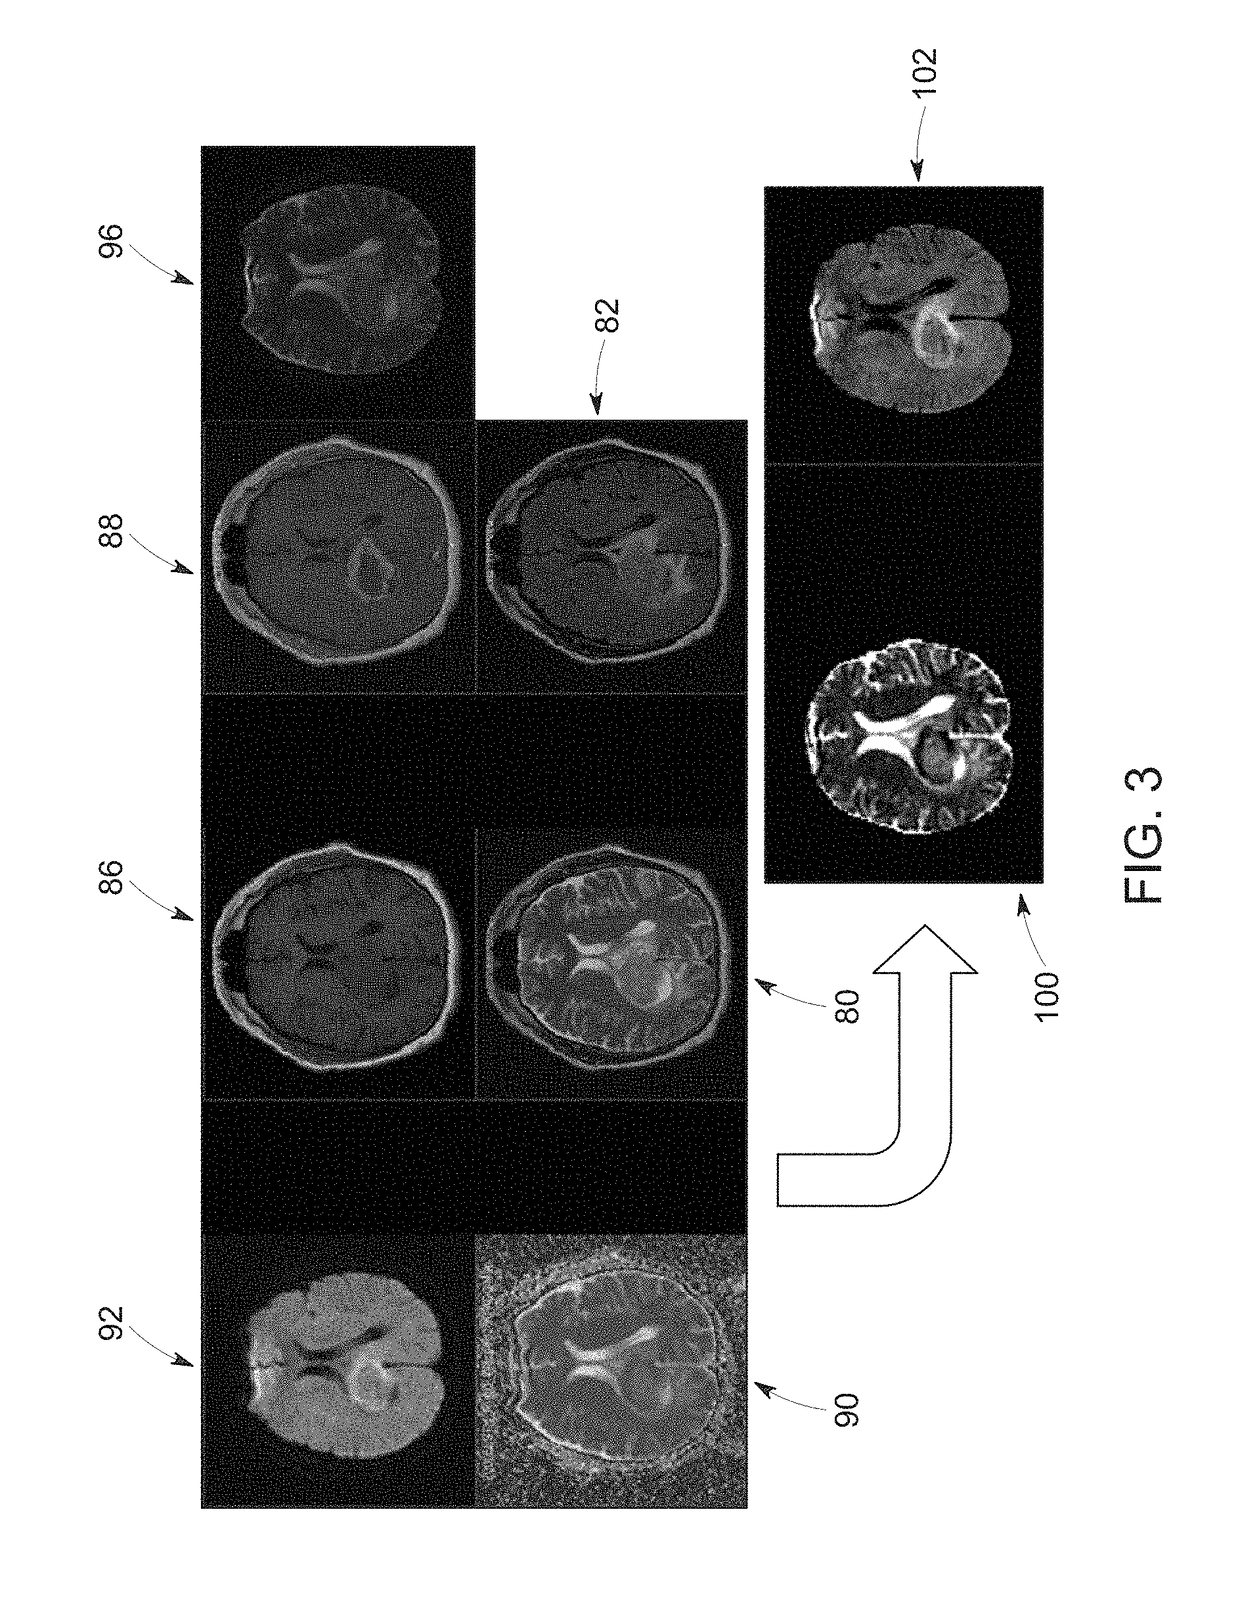 Physiology maps from multi-parametric radiology data